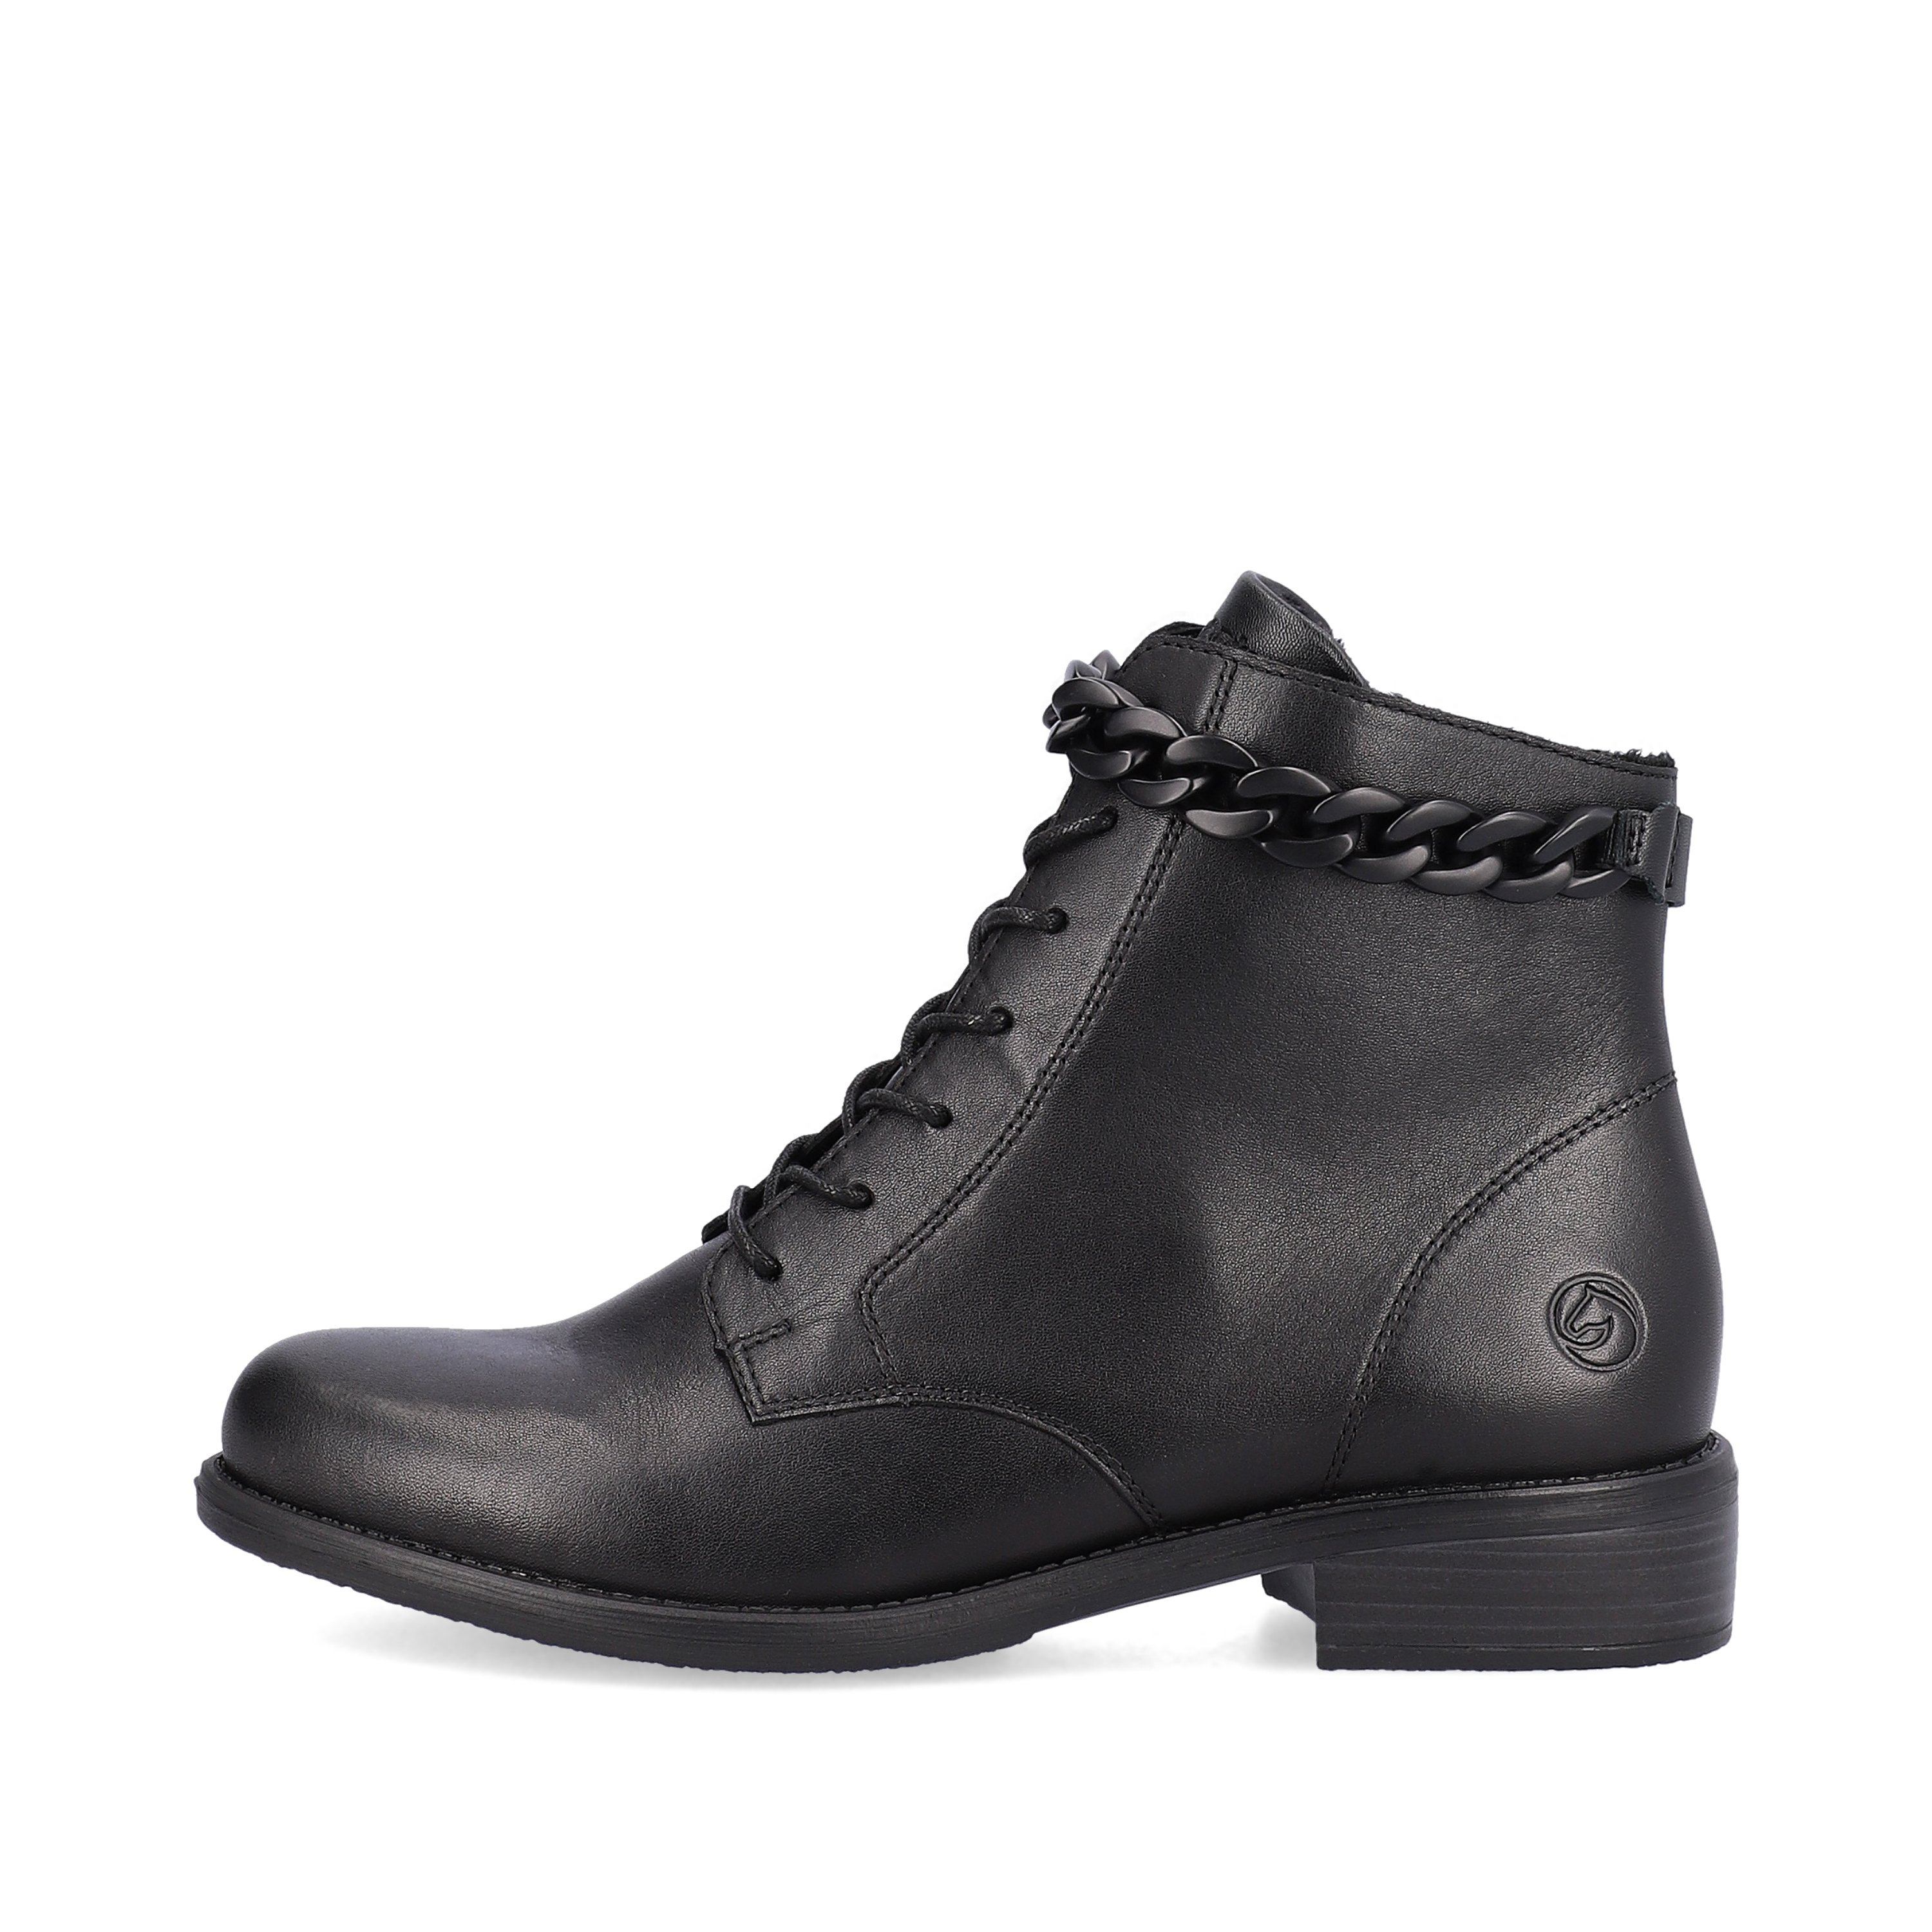 Glossy black remonte women´s biker boots D0F74-01 with light sole with block heel. The outside of the shoe